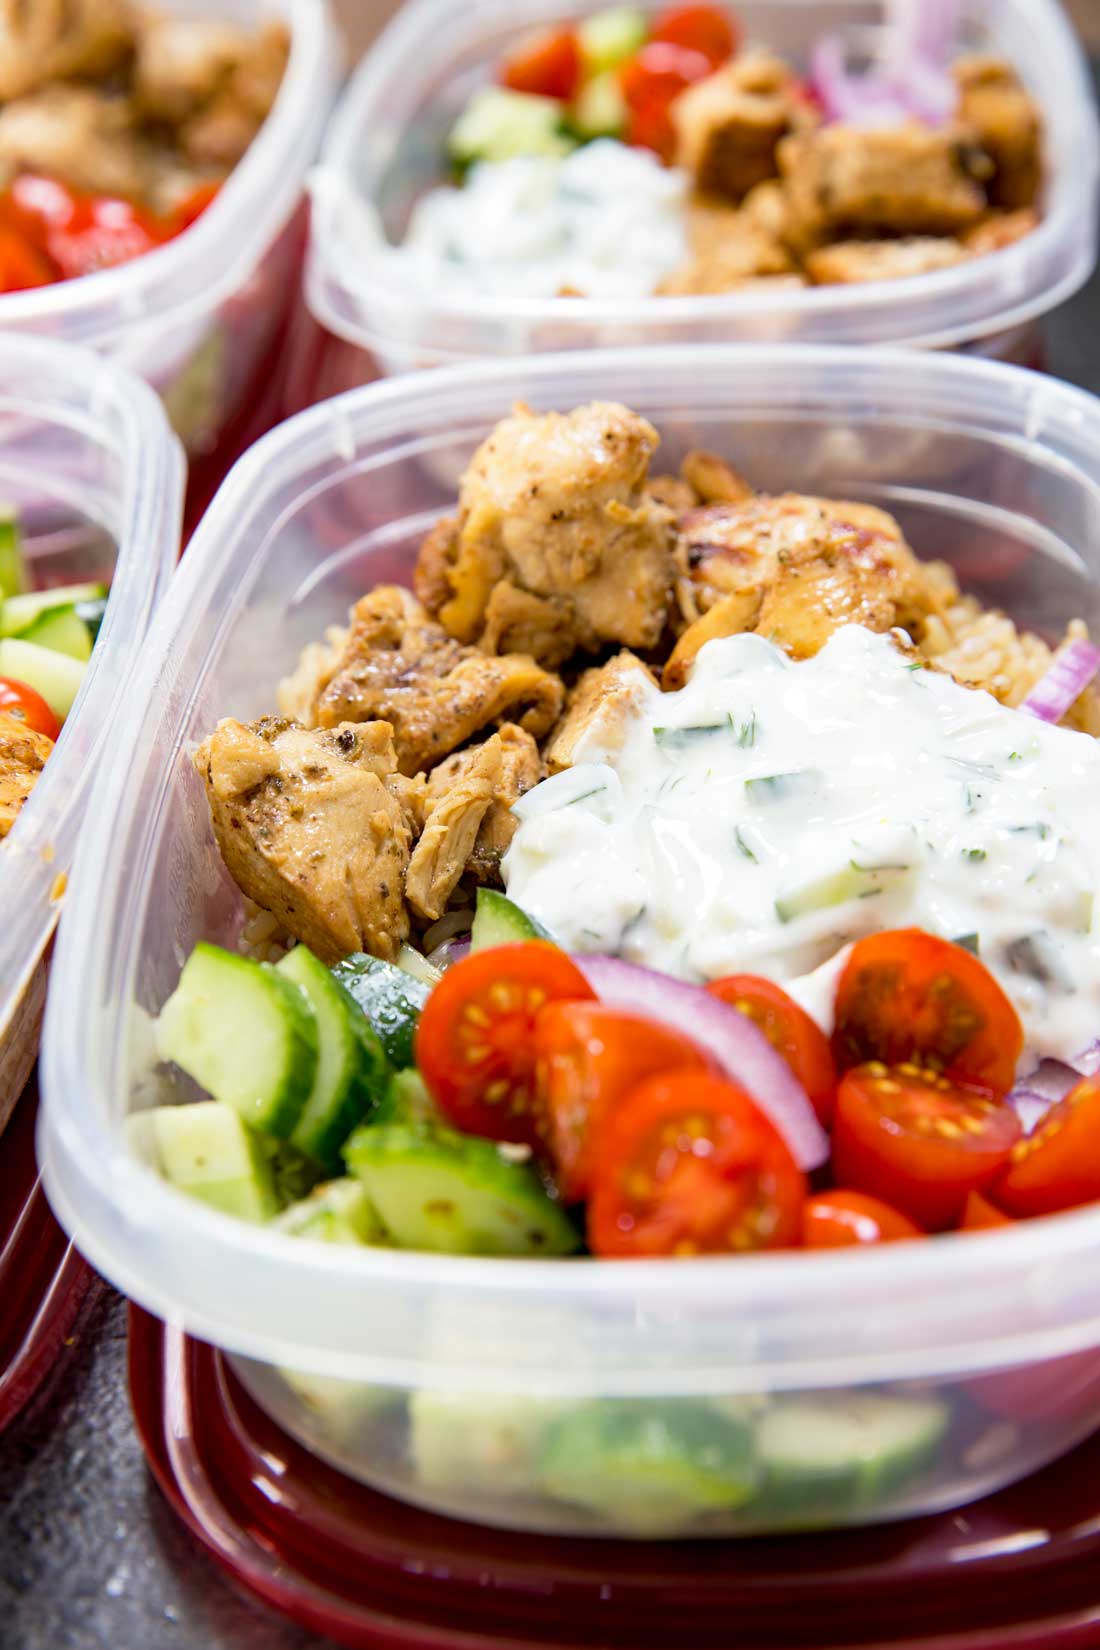 Meal Prepping Bowl Recipes: 9 Ideas So Your lunches Are Stress Free